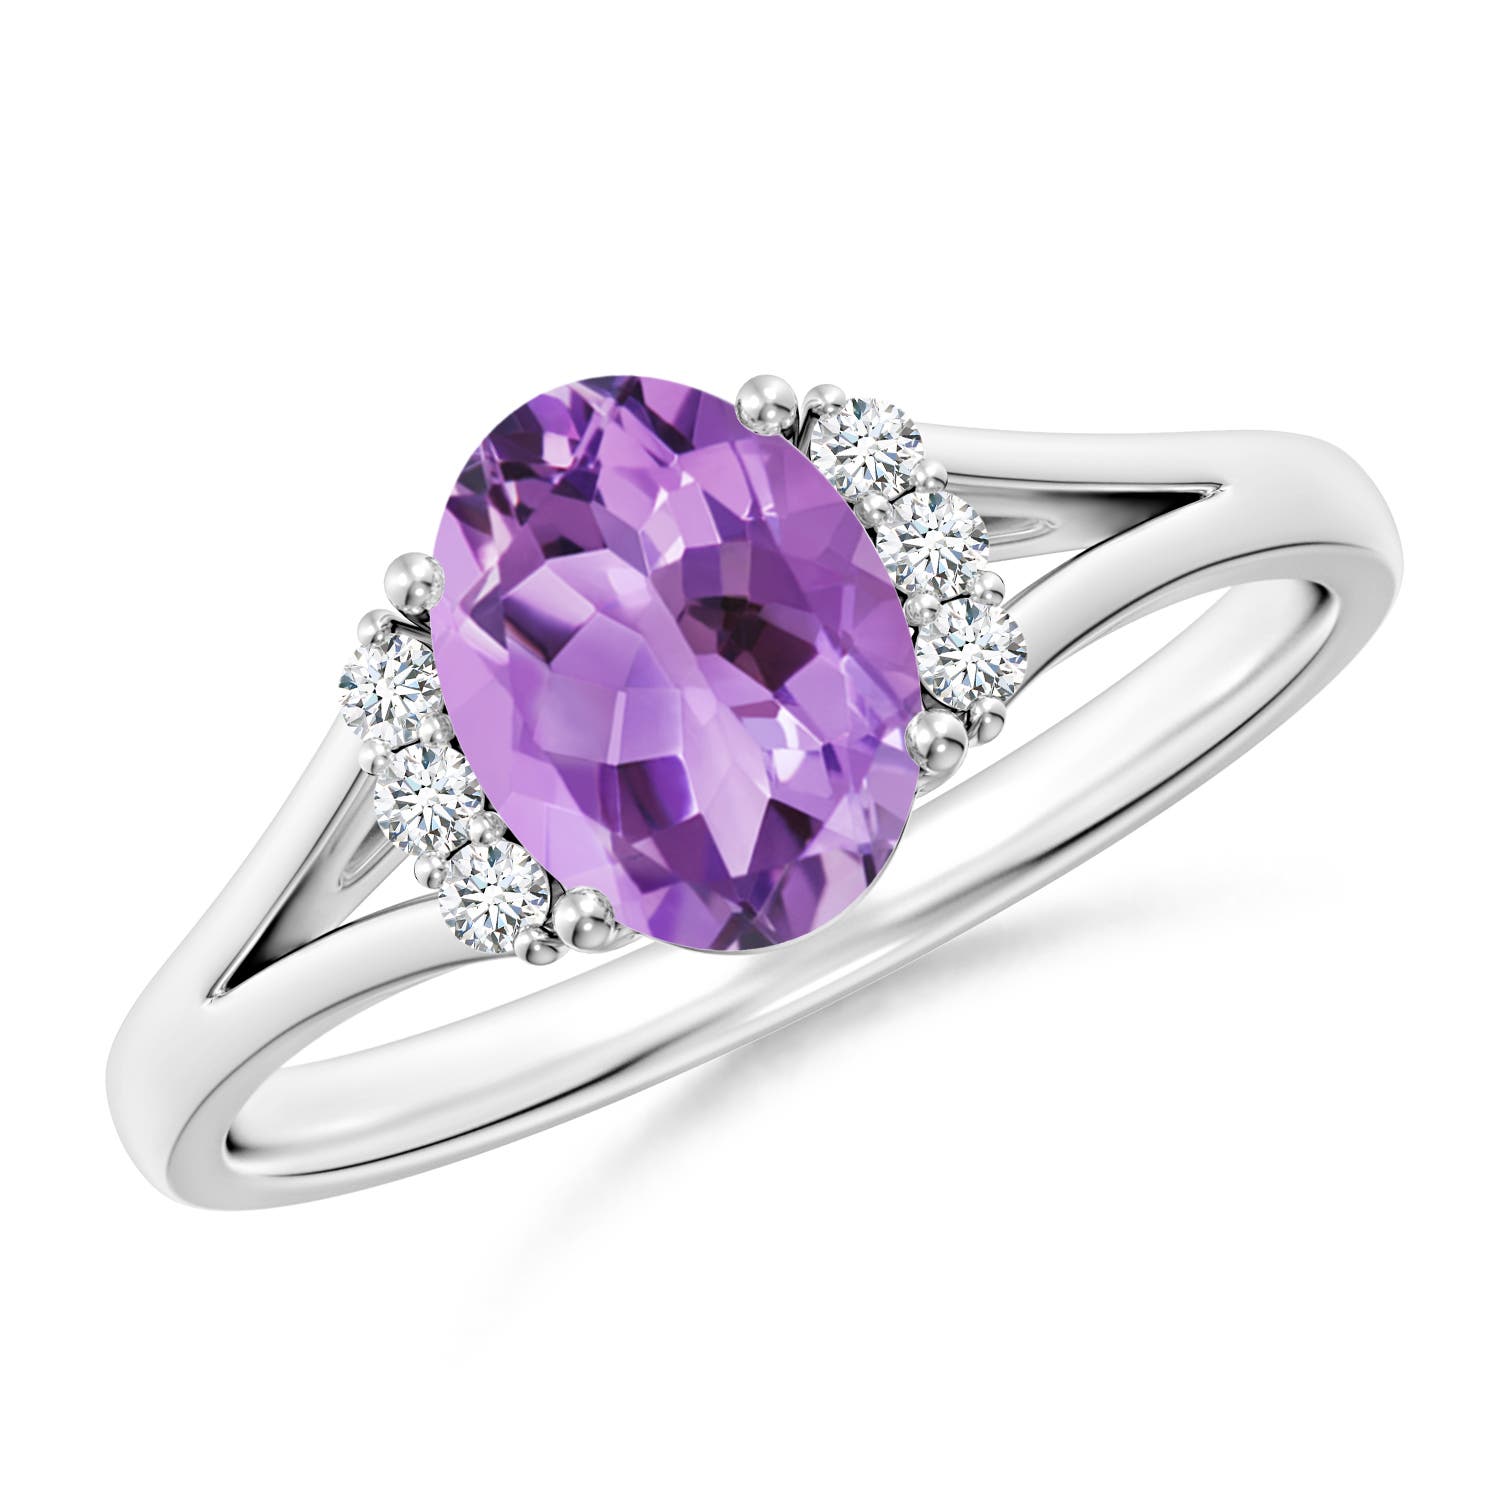 A - Amethyst / 1.23 CT / 14 KT White Gold